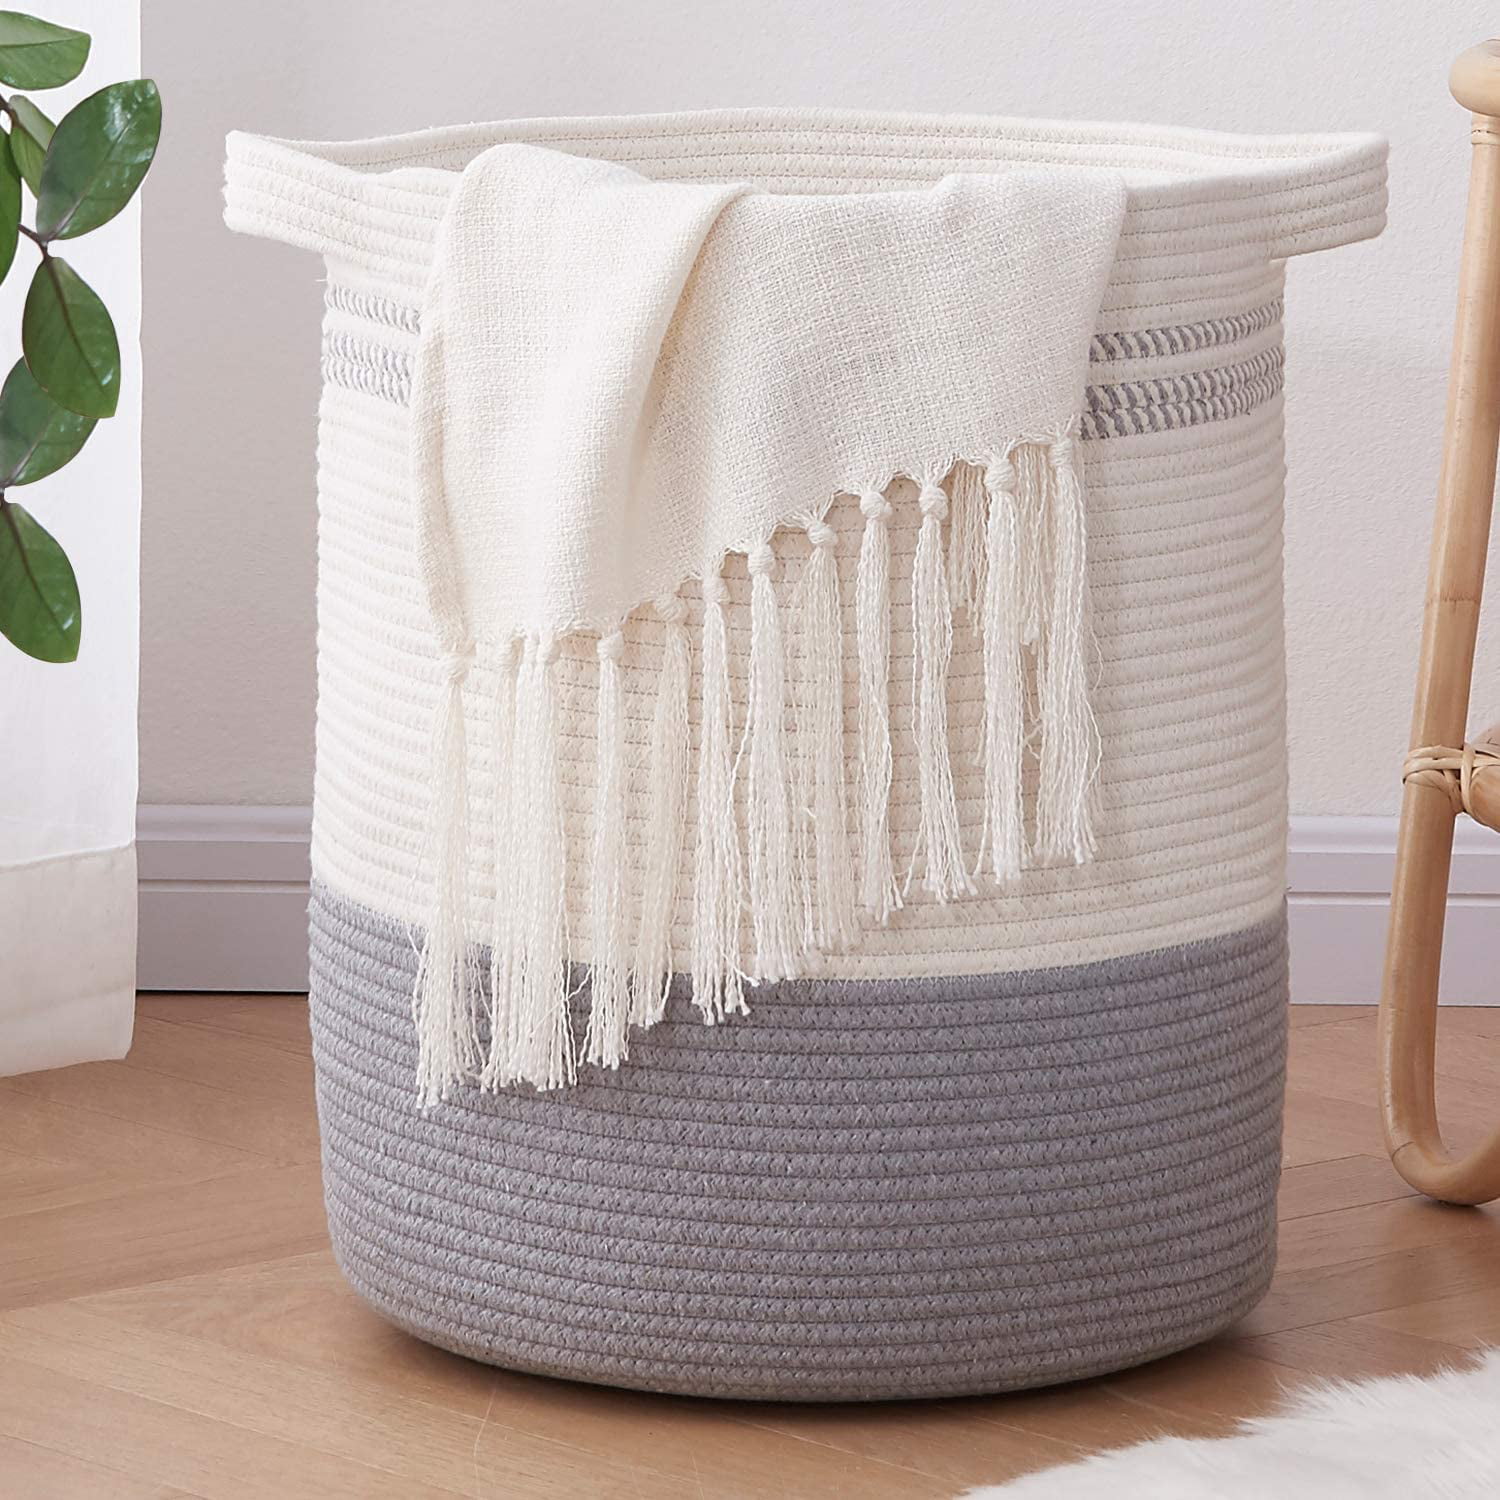 Extra Large Woven Storage Baskets Towels Coiled Round White Laundry Hamper with Handles Use for Sofa Throws Pillows 18 x 16 Decorative Blanket Basket Toys or Nursery Cotton Rope Organizer